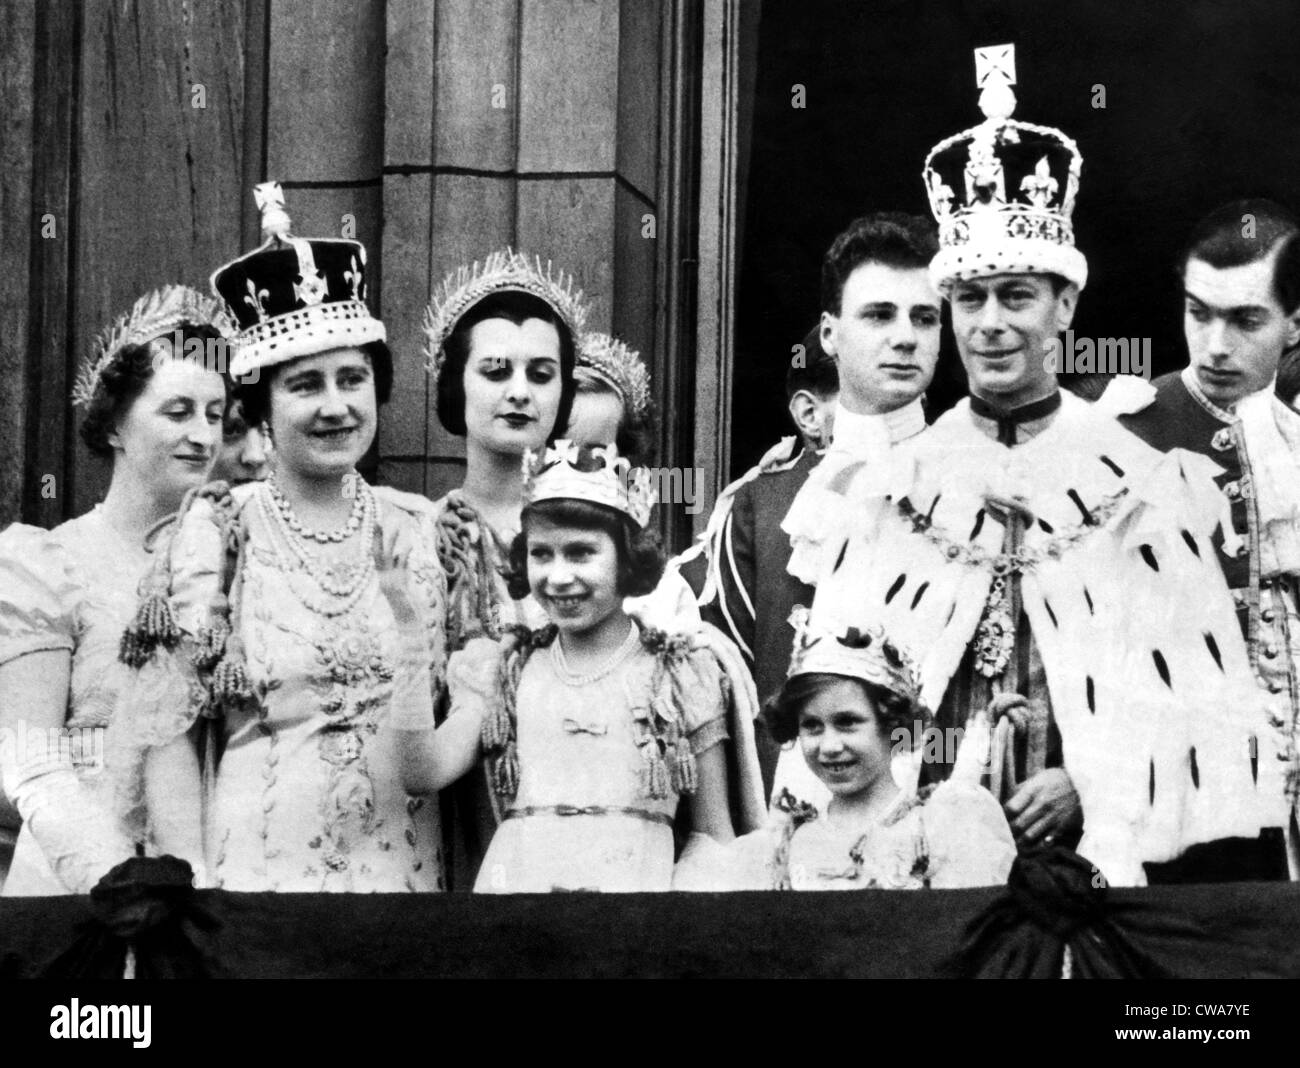 After Coronation ceremonies, the Royal family gathers to greet their subjects. L-R, foreground: Queen Elizabeth (Queen Consort Stock Photo